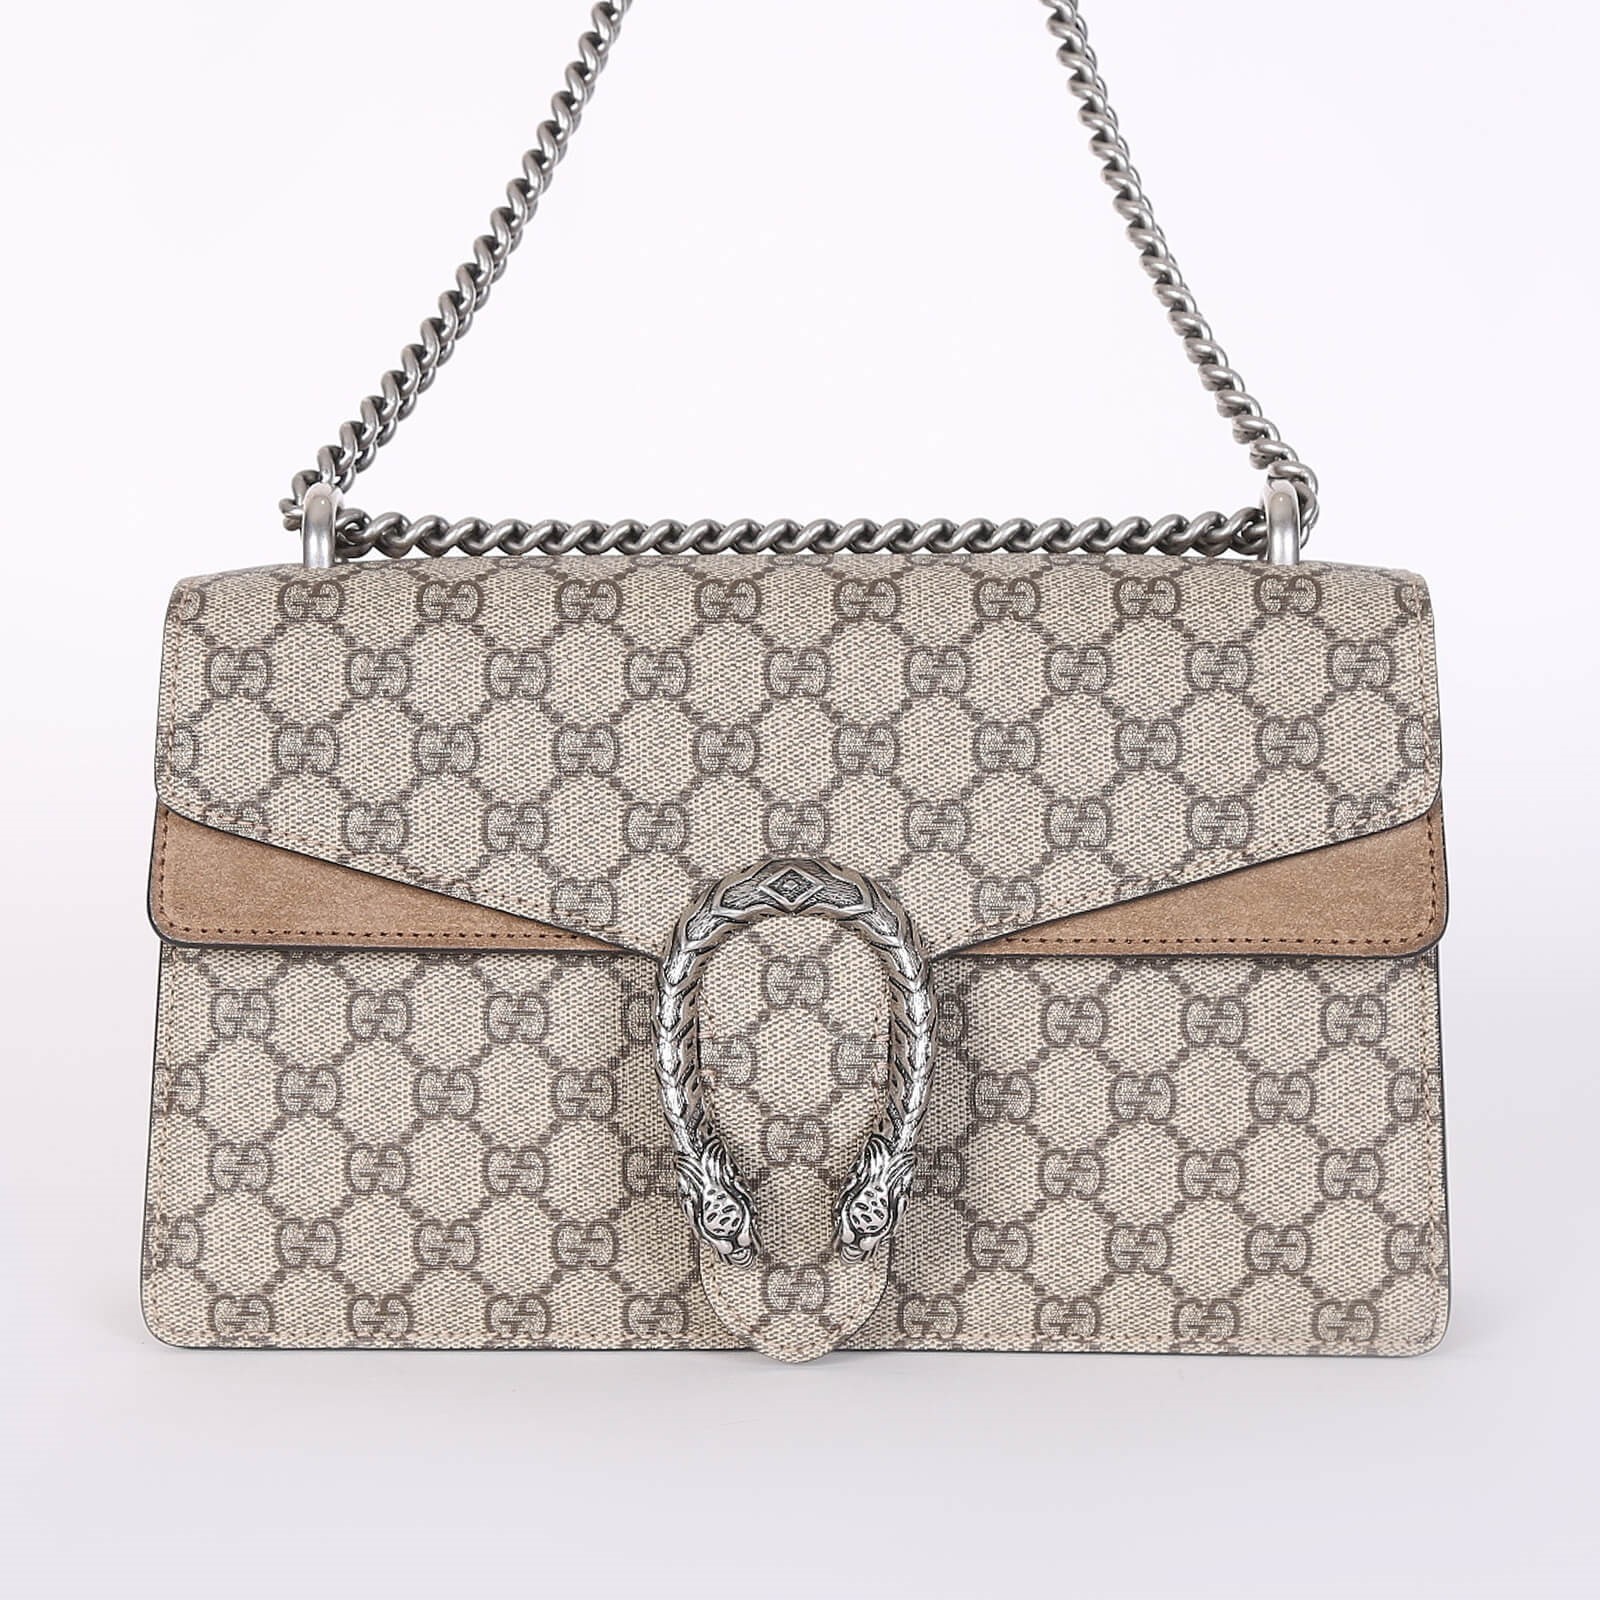 AUTHENTIC - GUCCI Dionysus (small) shoulder bag - Leather (Free